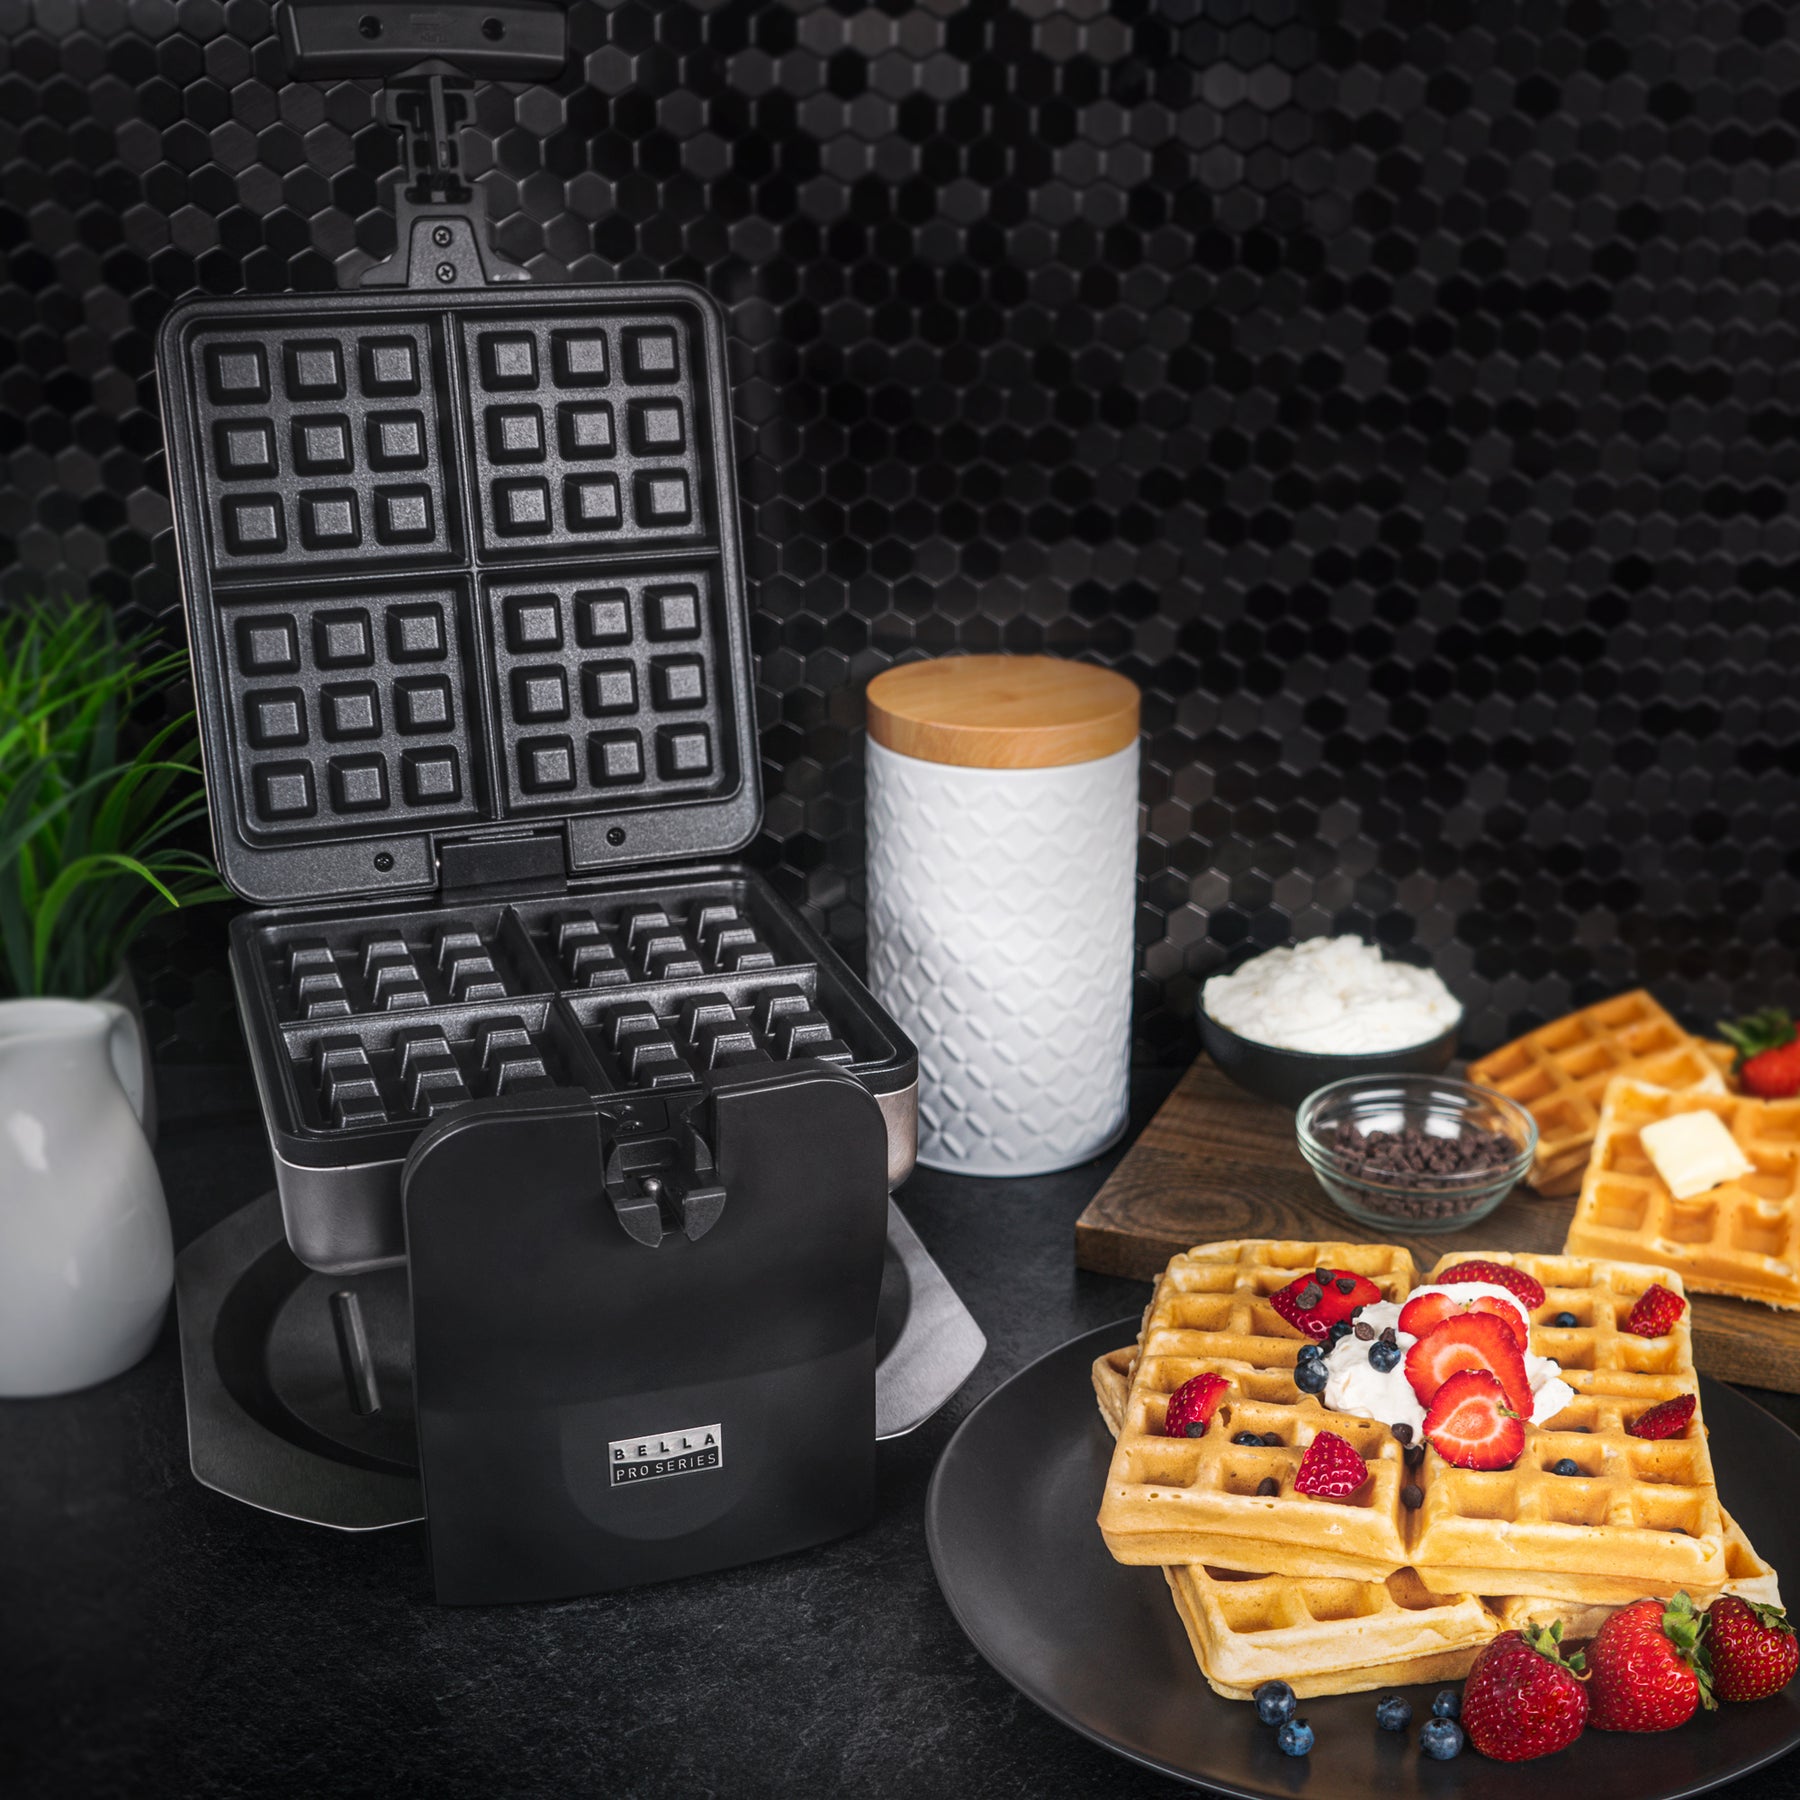 BELLA Classic Rotating Non-Stick Belgian Waffle Maker, Black & Electric  Griddle w Warming Tray, Make 8 Pancakes or Eggs At Once, Fry Flip & Serve